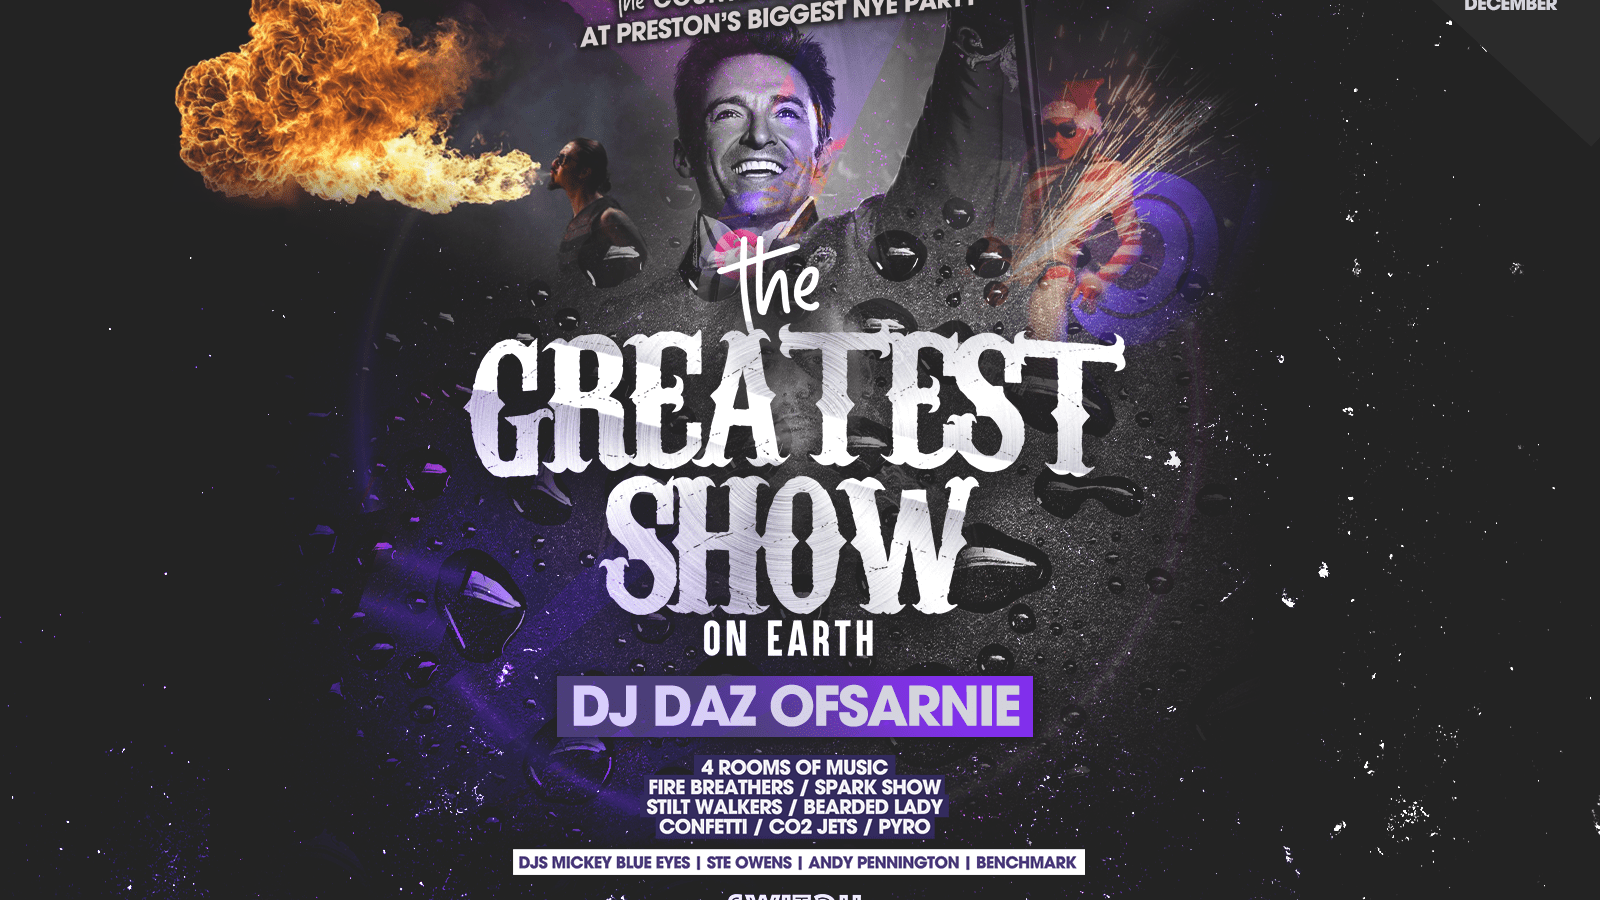 Switch Presents The Greatest Show NYE / Dec 31st